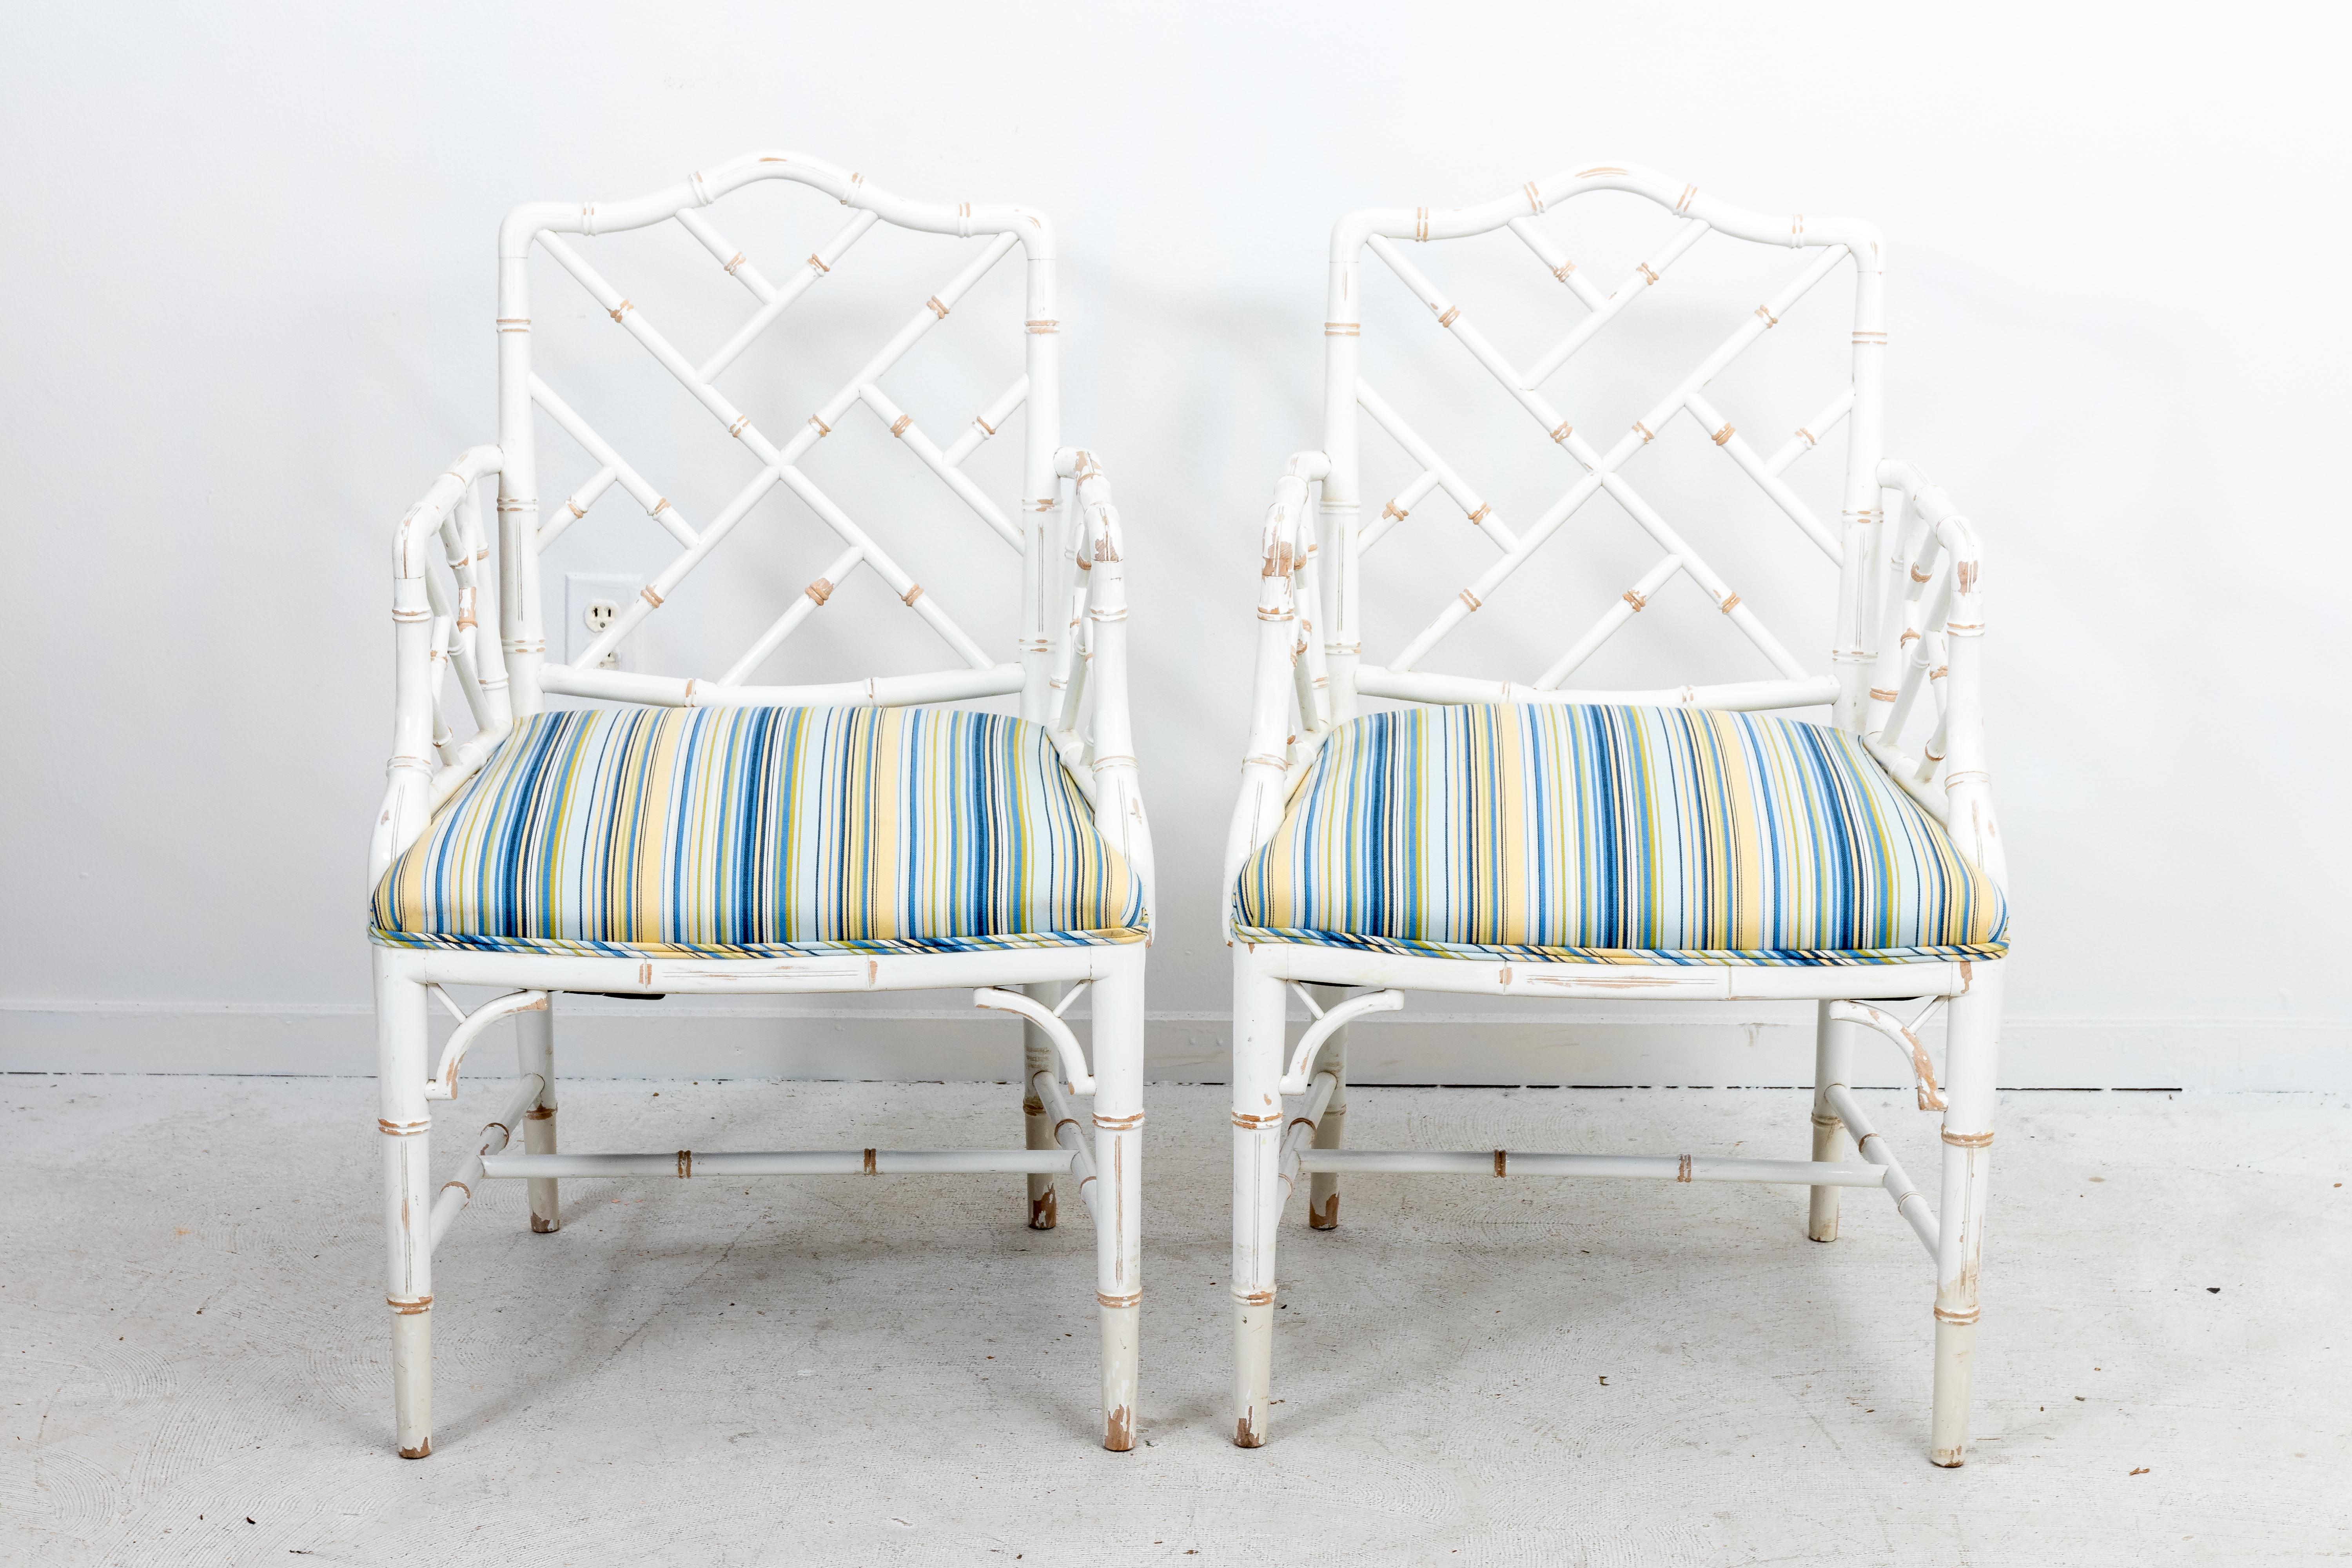 Pair of Chinese Chippendale style distressed finish faux bamboo armchairs. Made by Century Furniture in North Carolina. Clean upholstery. Priced per pair.